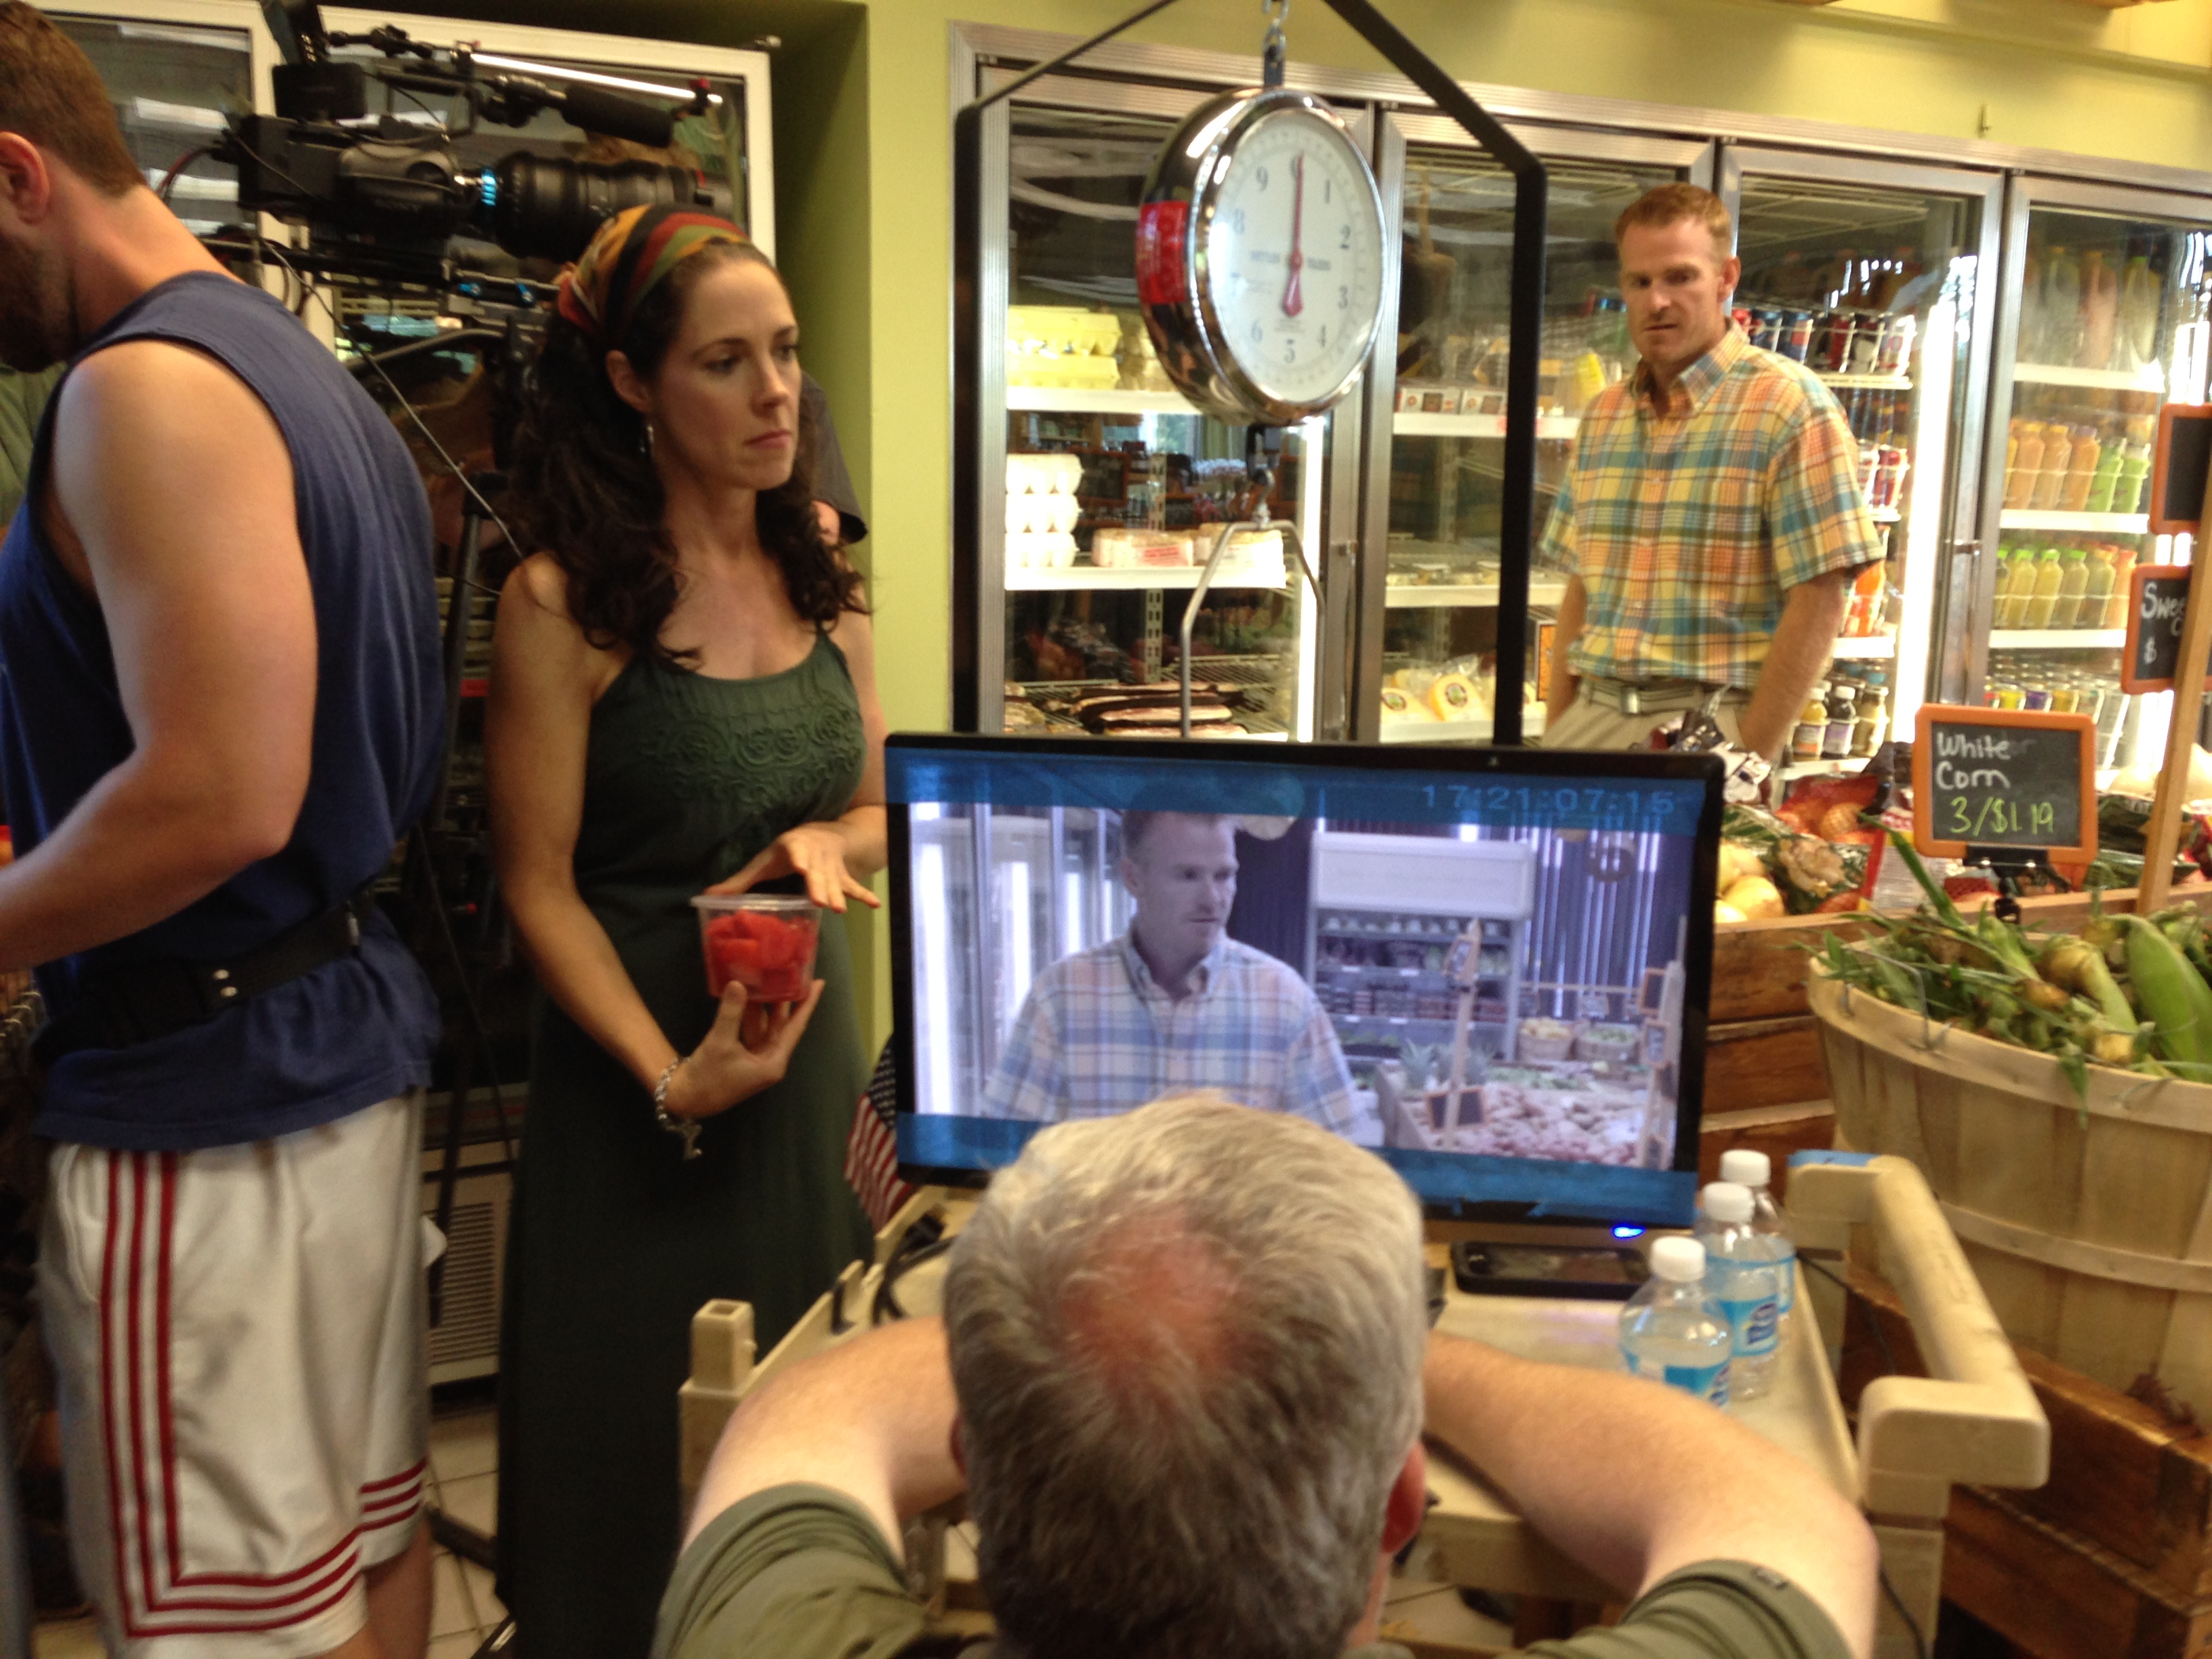 On set of Sinking Sand in a scene with Jim E. Chandler and Holly Morris